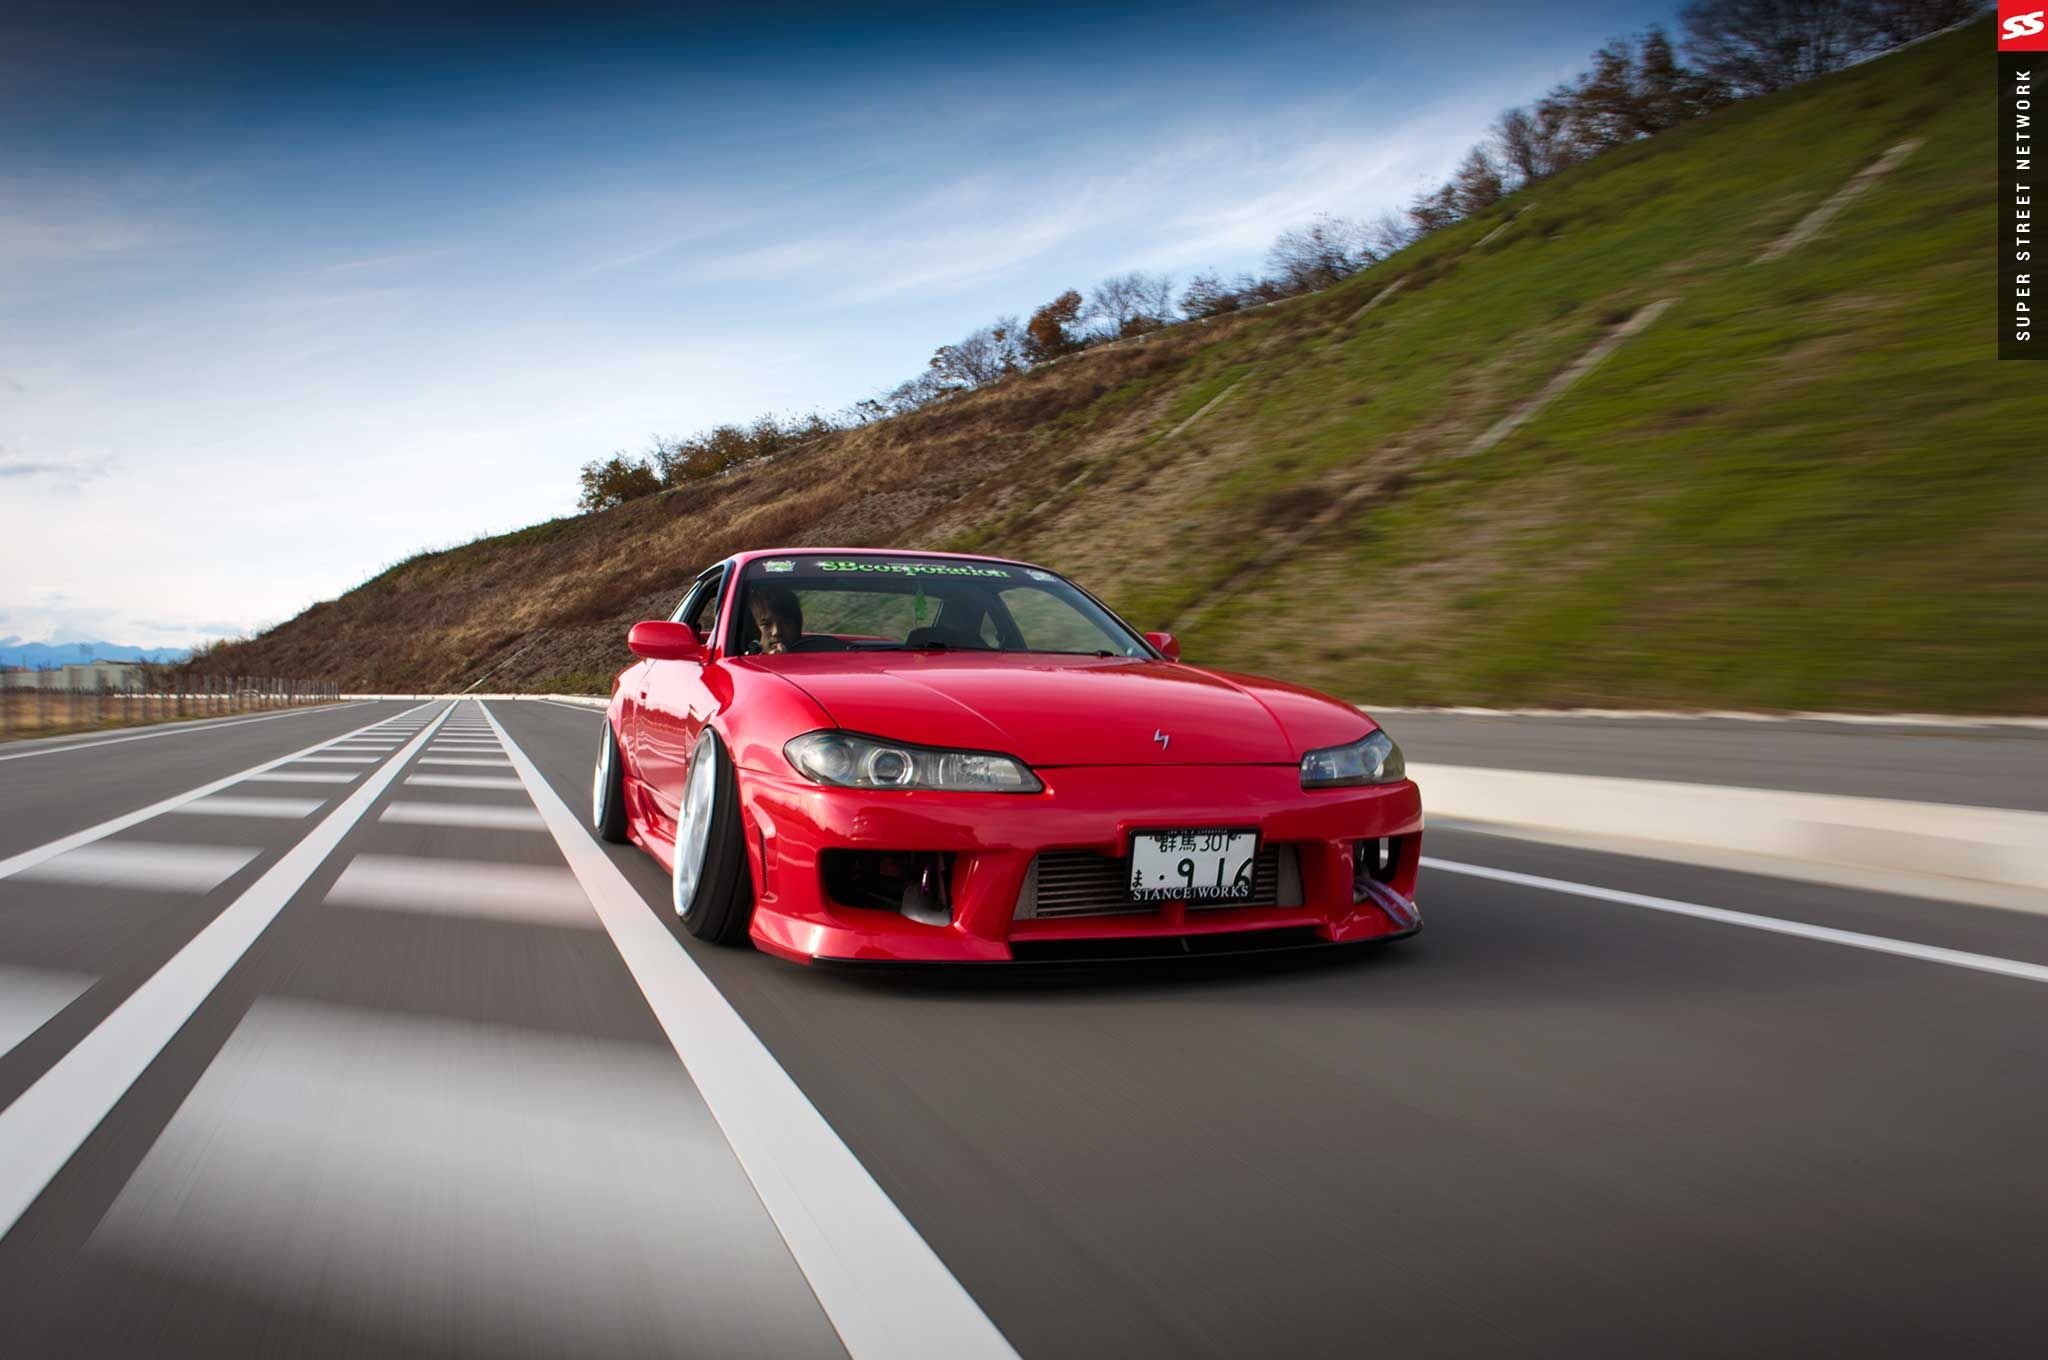 2000, Nissan, Silvia, S15, Cars, Red, Modified Wallpaper